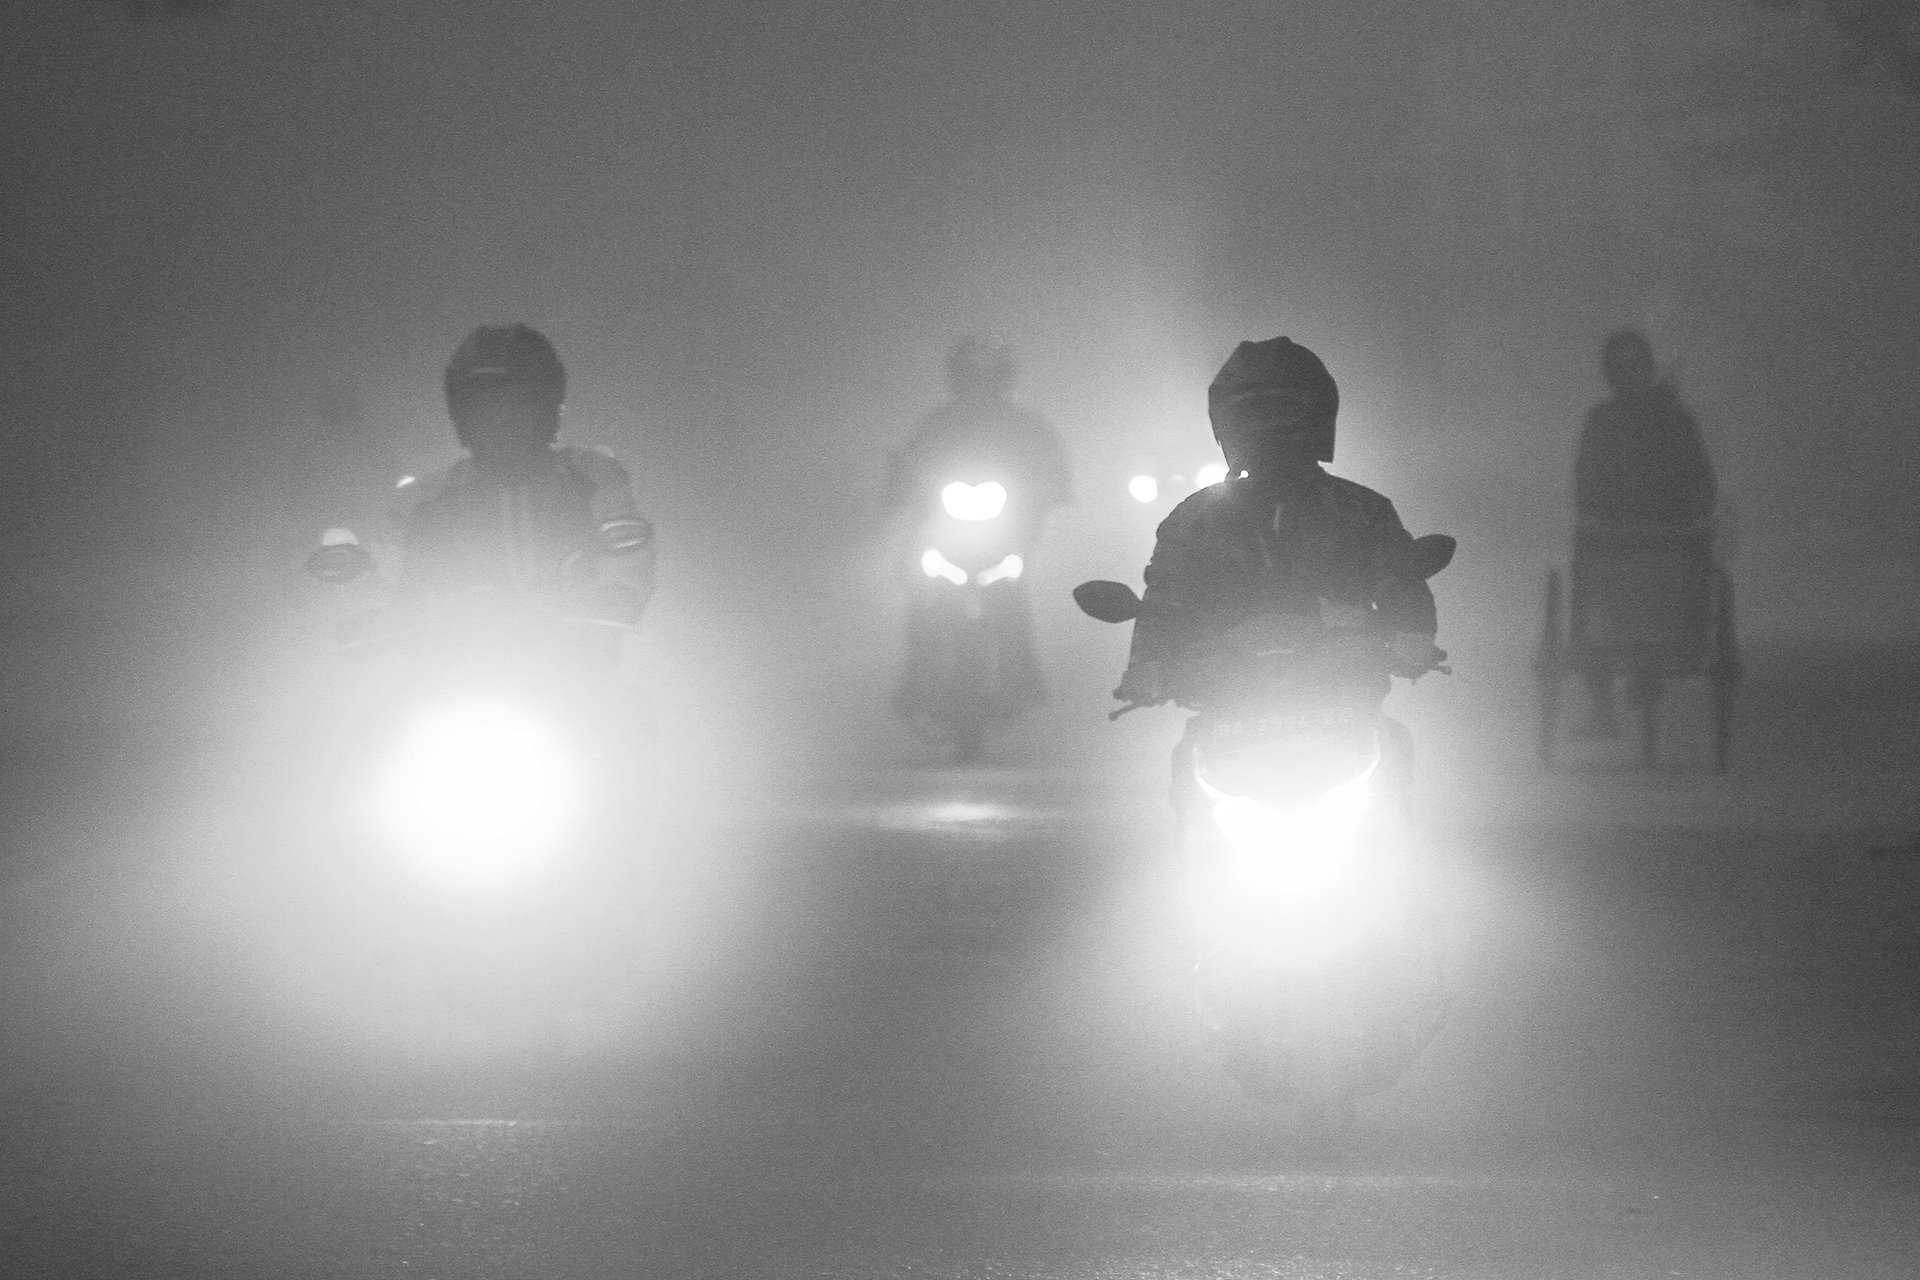 Motorcyclists in the city of Palembang, South Sumatra, Indonesia, ride through thick smoke that has drifted from a forest fire burning outside the city.